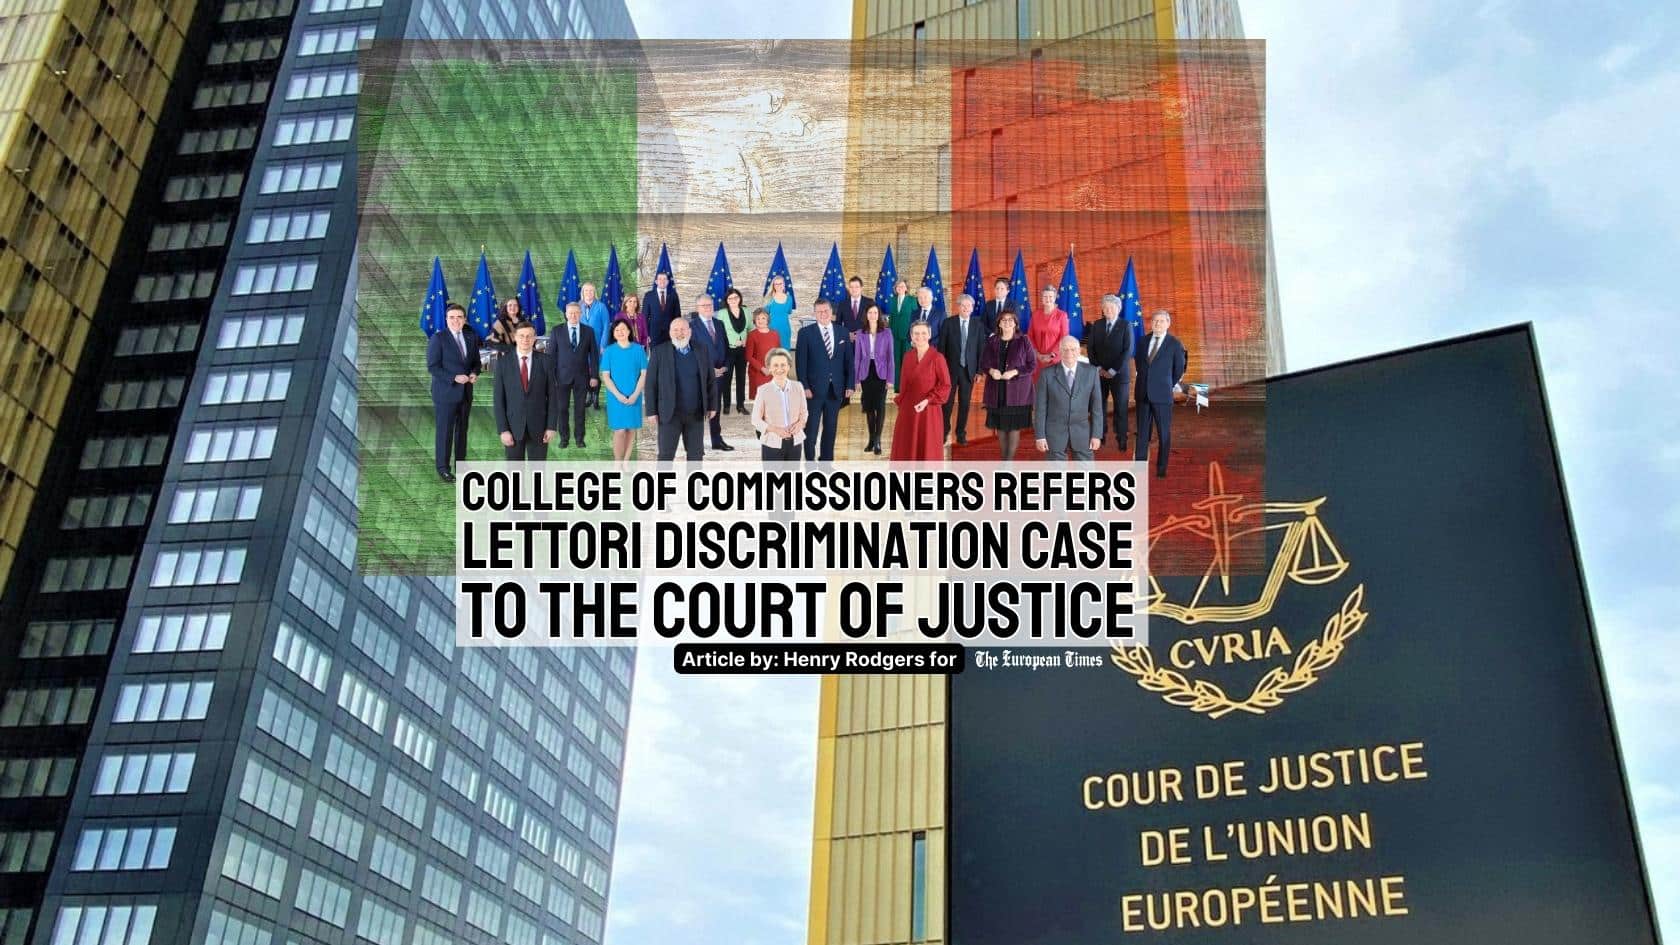 College of Commissioners refers Lettori discrimination case to the Court of Justice